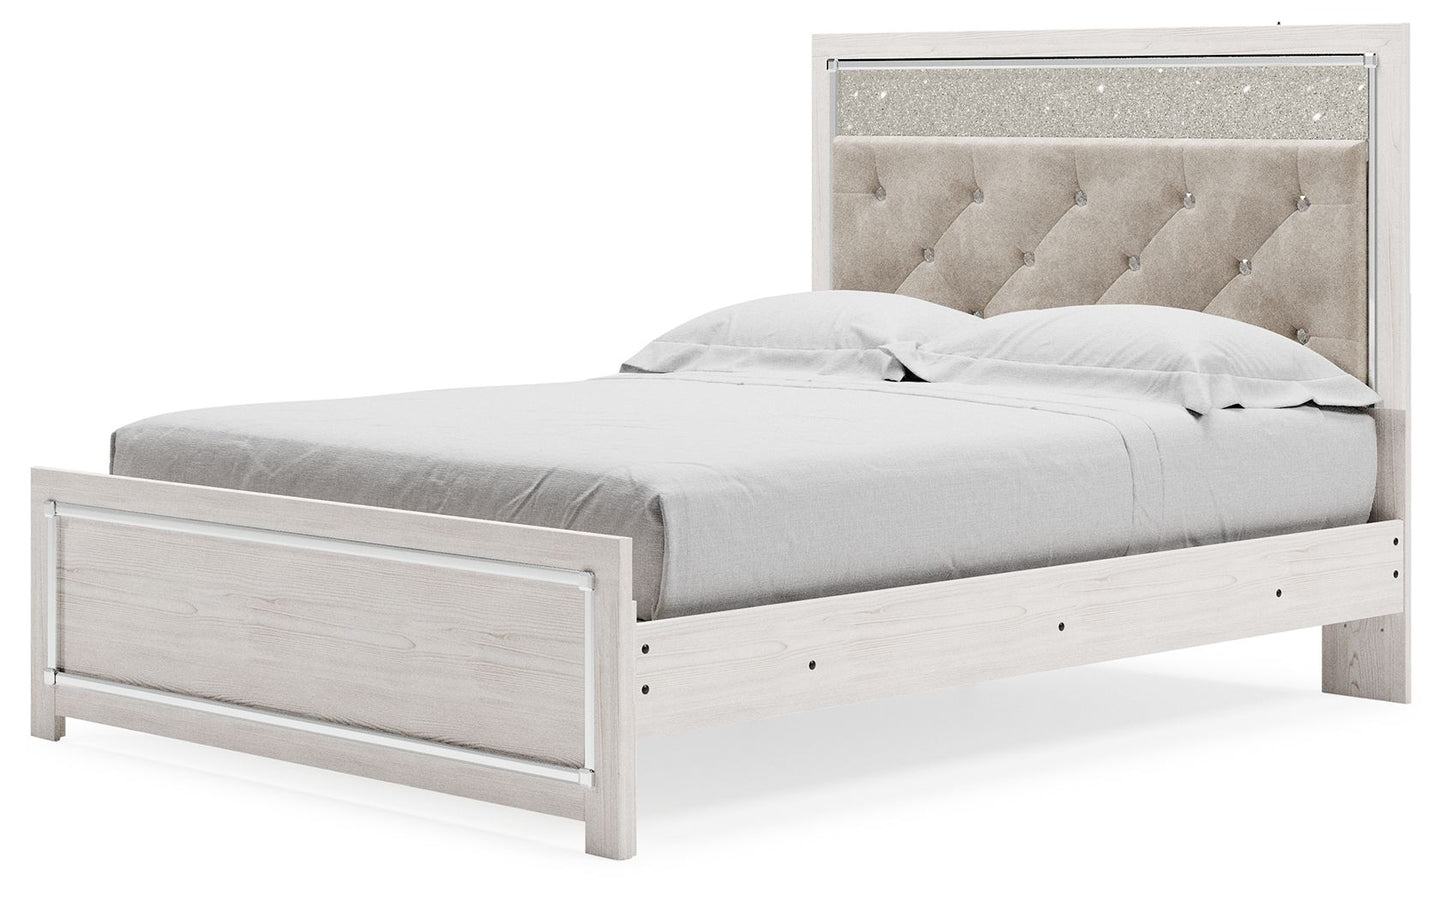 Altyra - Panel Bed